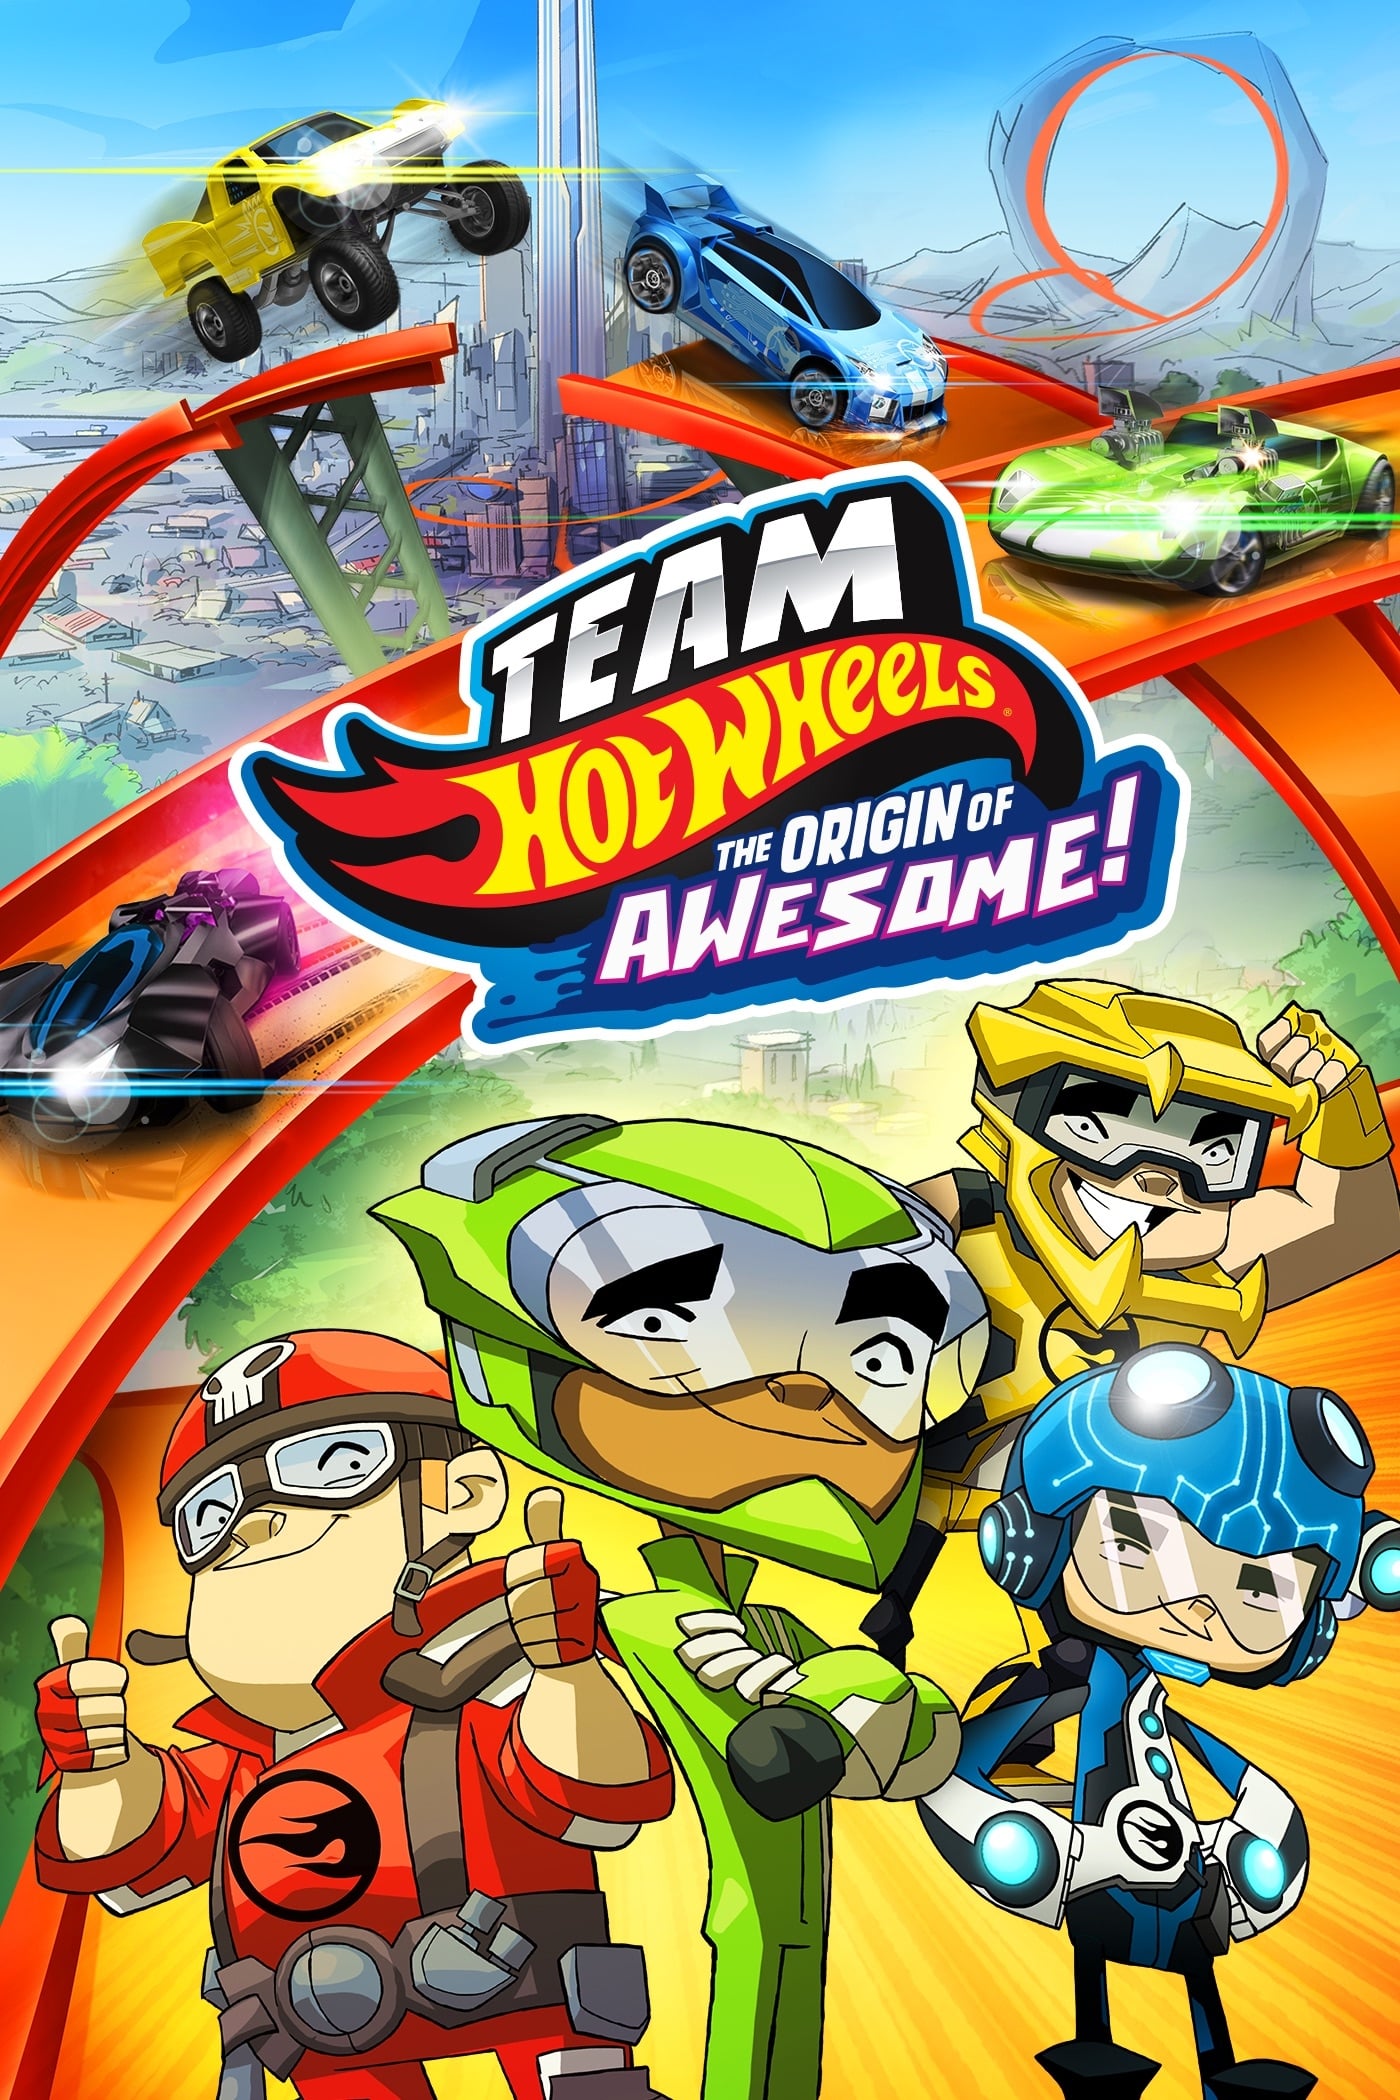 NO Team Hot Wheels The Origin Of Awesome